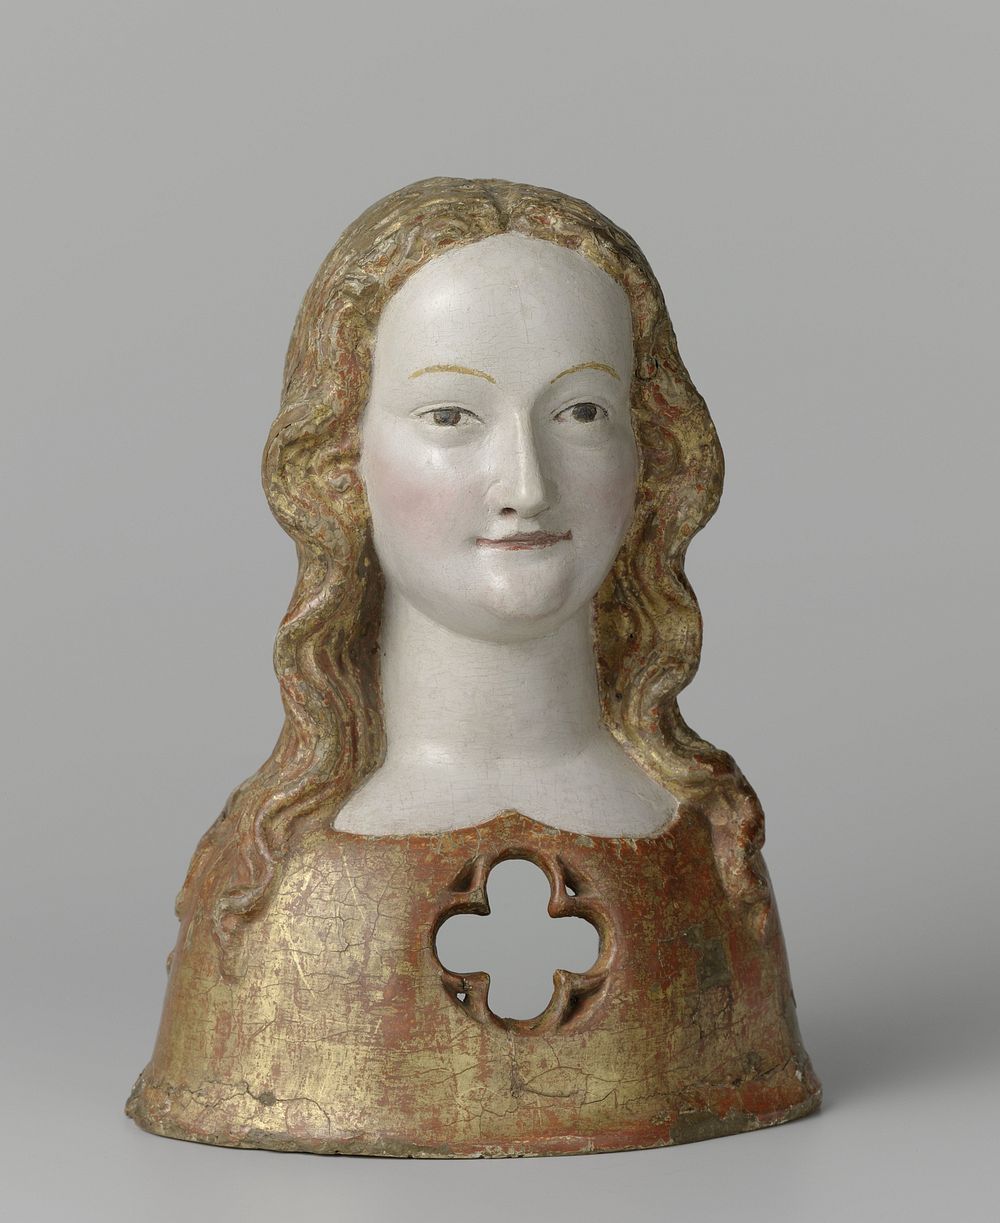 Reliquary bust of one of Saint Ursula’s virgins (c. 1325 - c. 1349) by anonymous